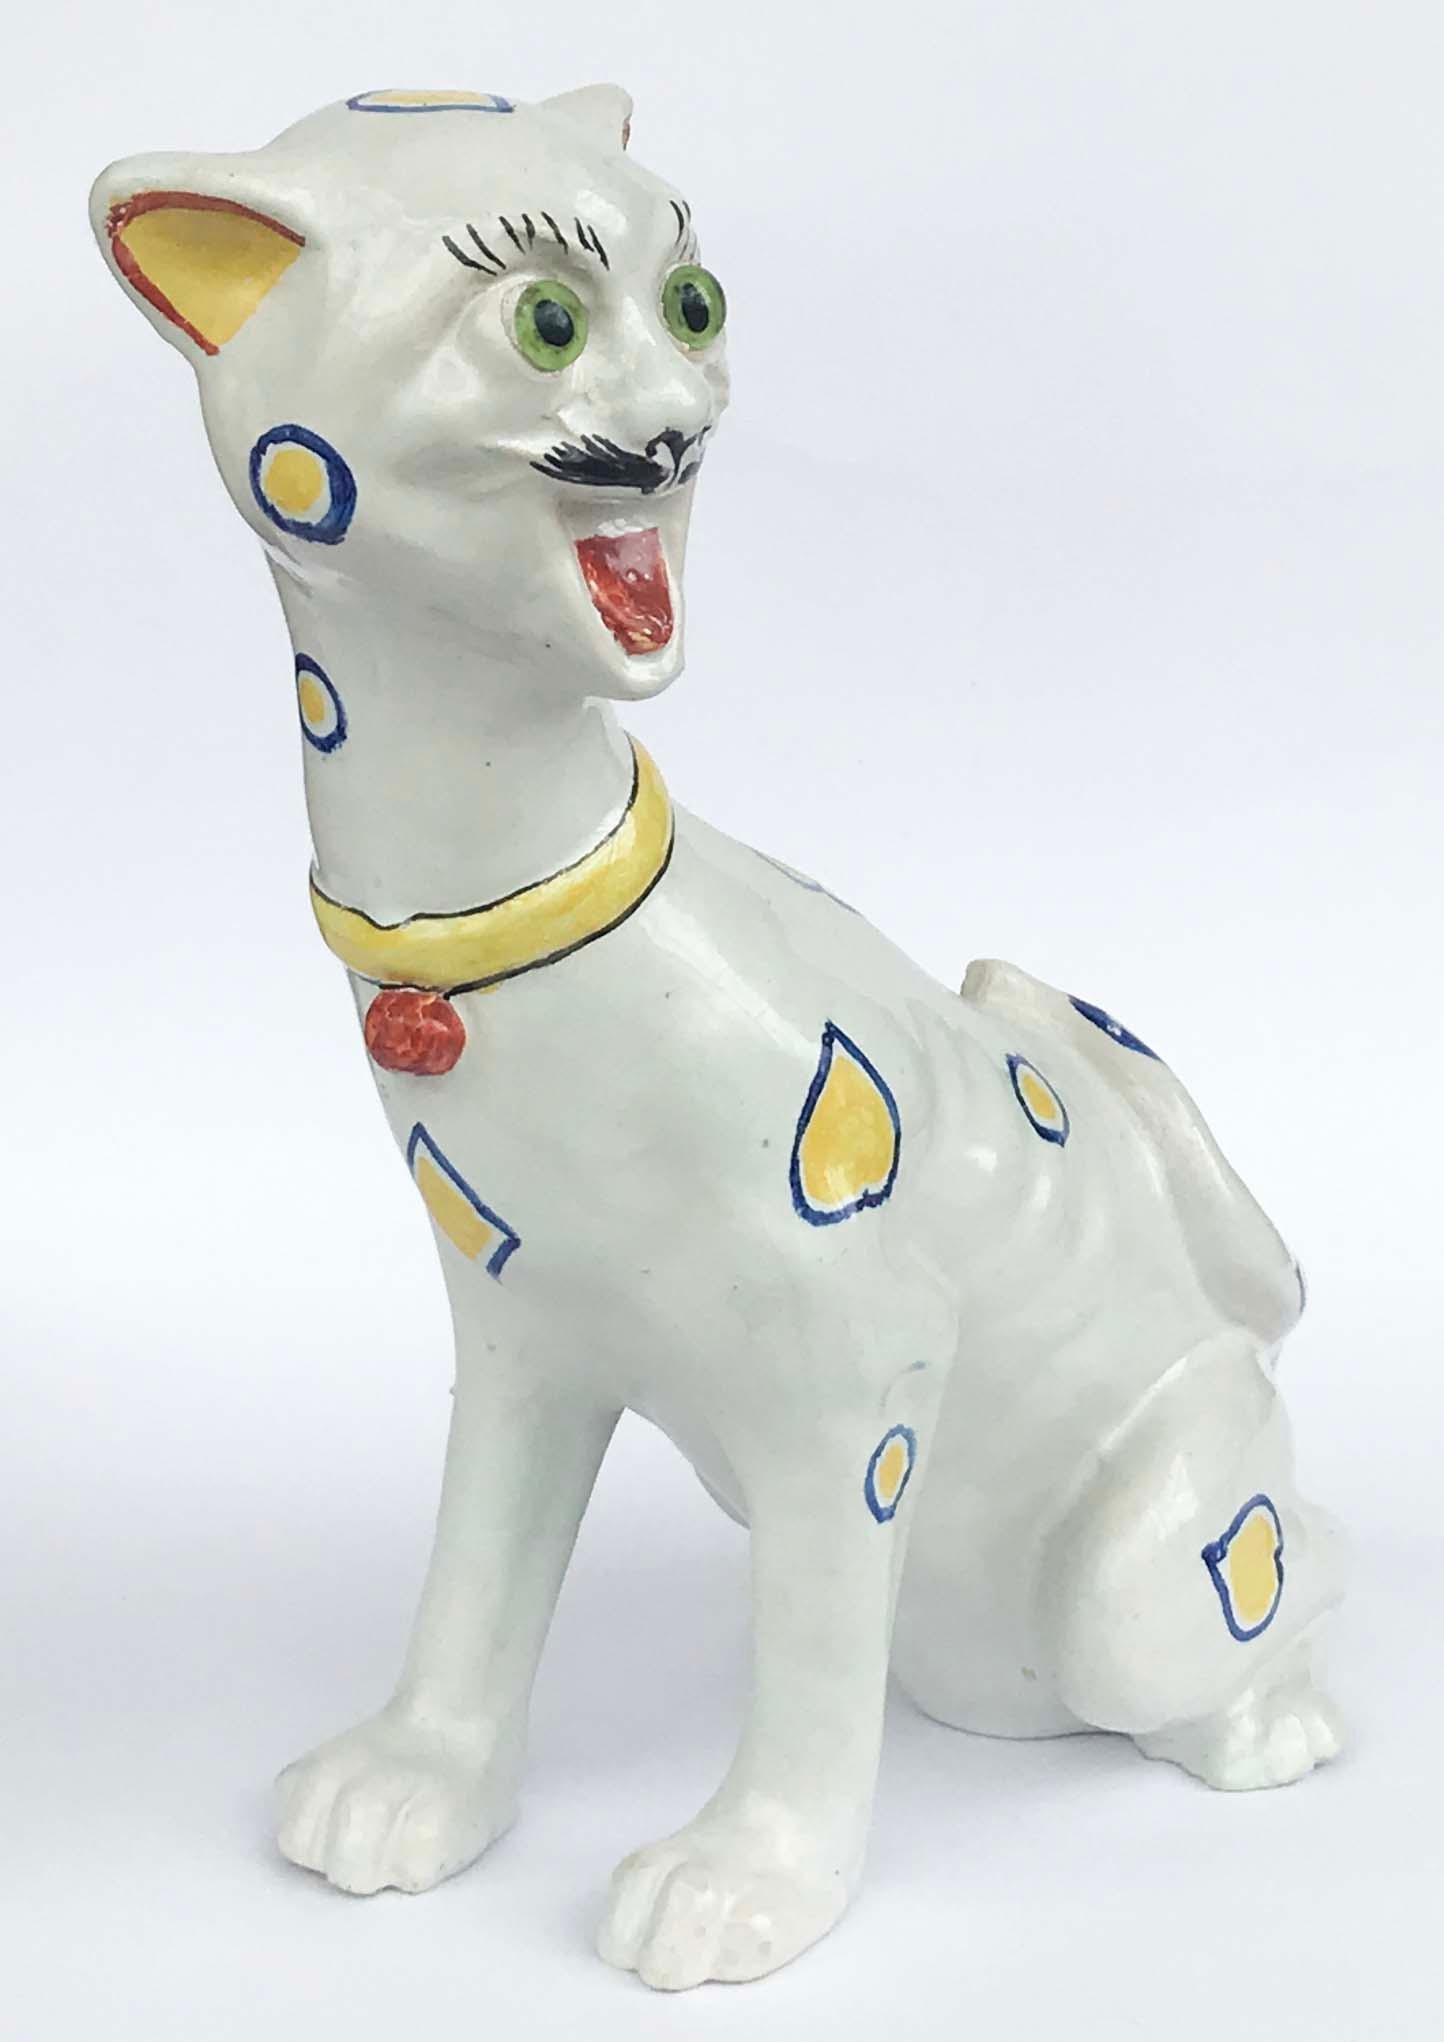 A charming late 19th century French Faience laughing cat, circa 1890 produced by the pottery manufacturer 'Mosanic', the white glazed body with hand decorated painted blue and yellow hearts, a yellow collar with deep orange bell, the head with